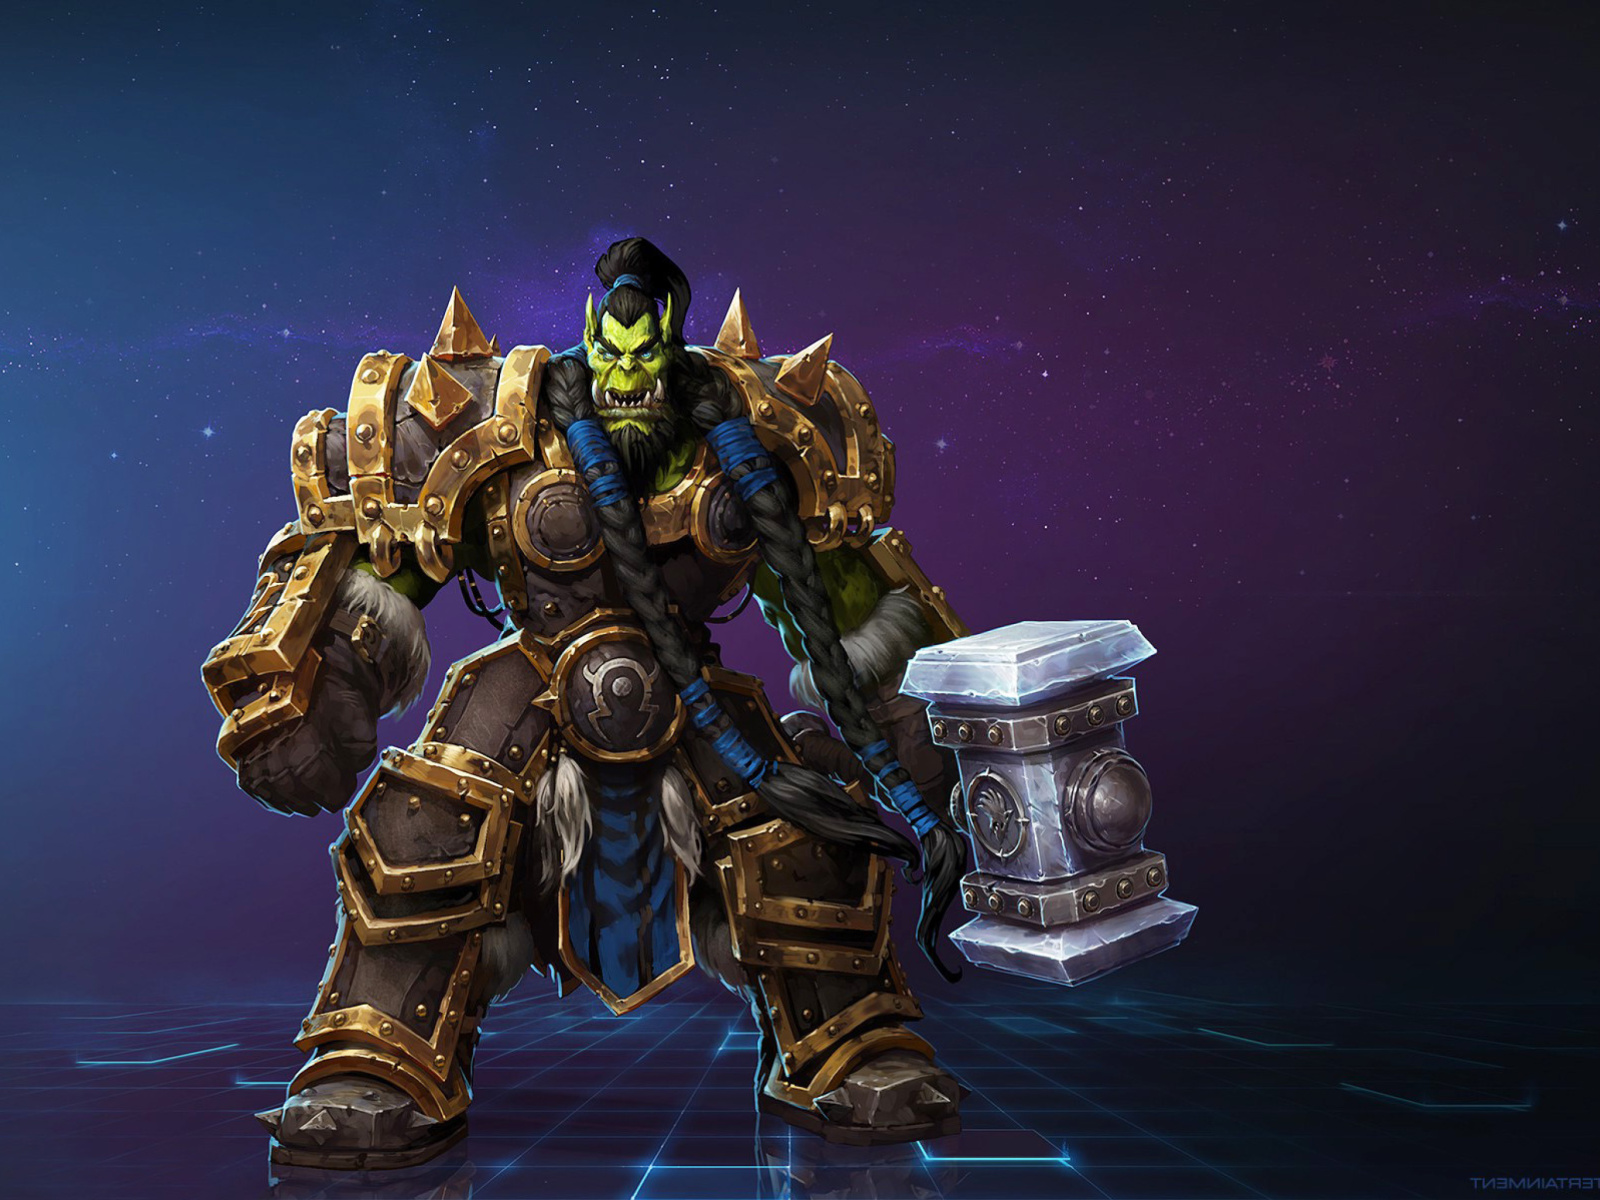 Heroes of the Storm multiplayer online battle arena video game wallpaper 1600x1200